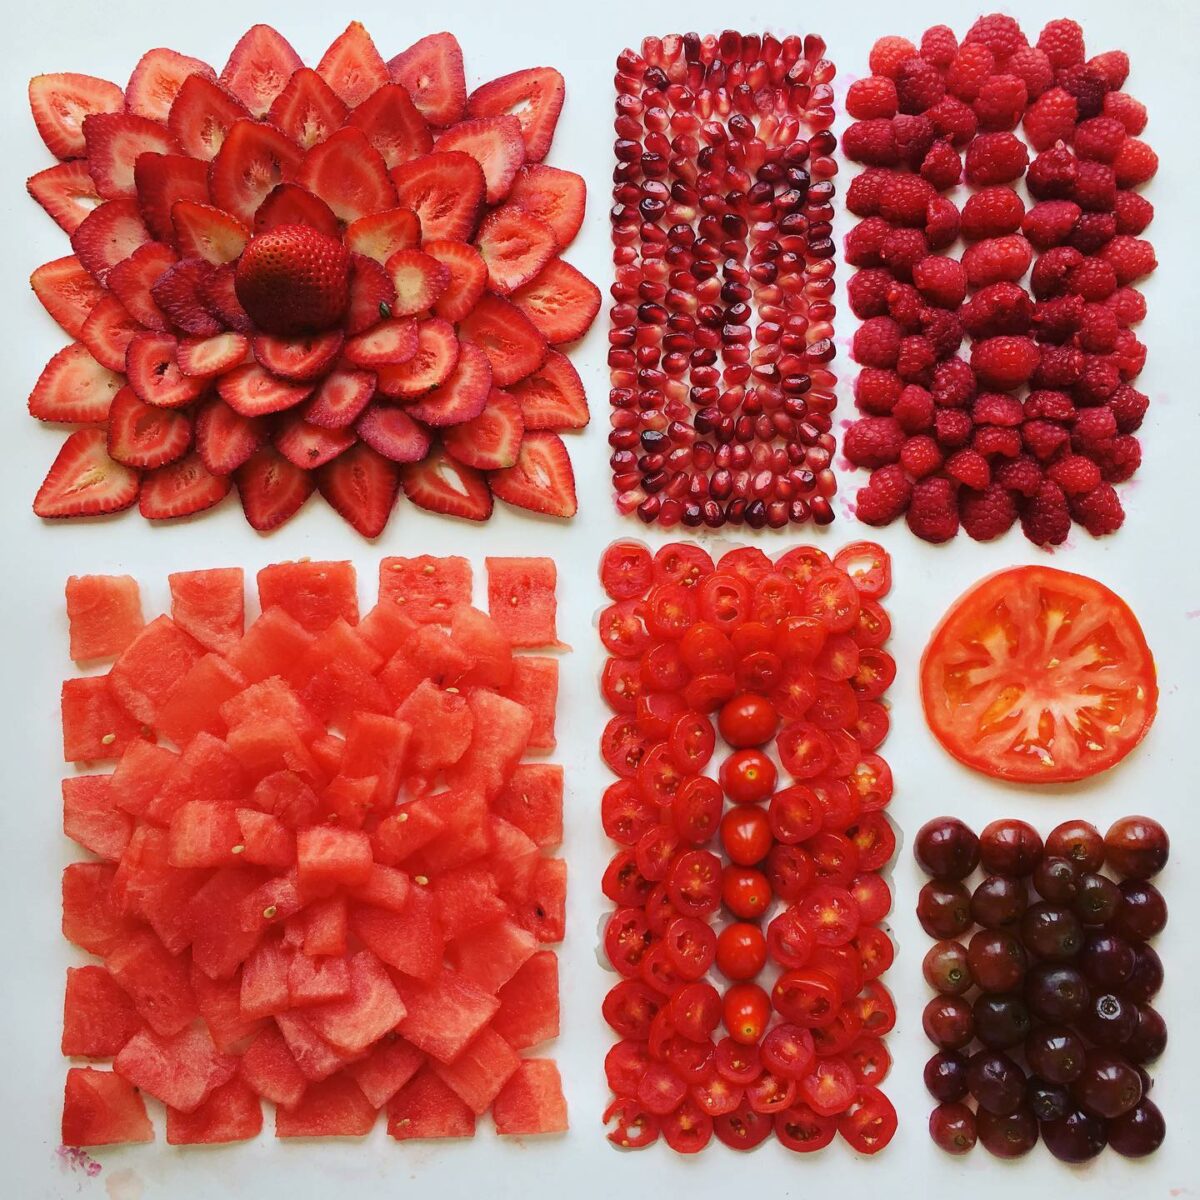 Hypnotizing Pattern Arrangements Of Food And Everyday Objects By Adam Hillman 12